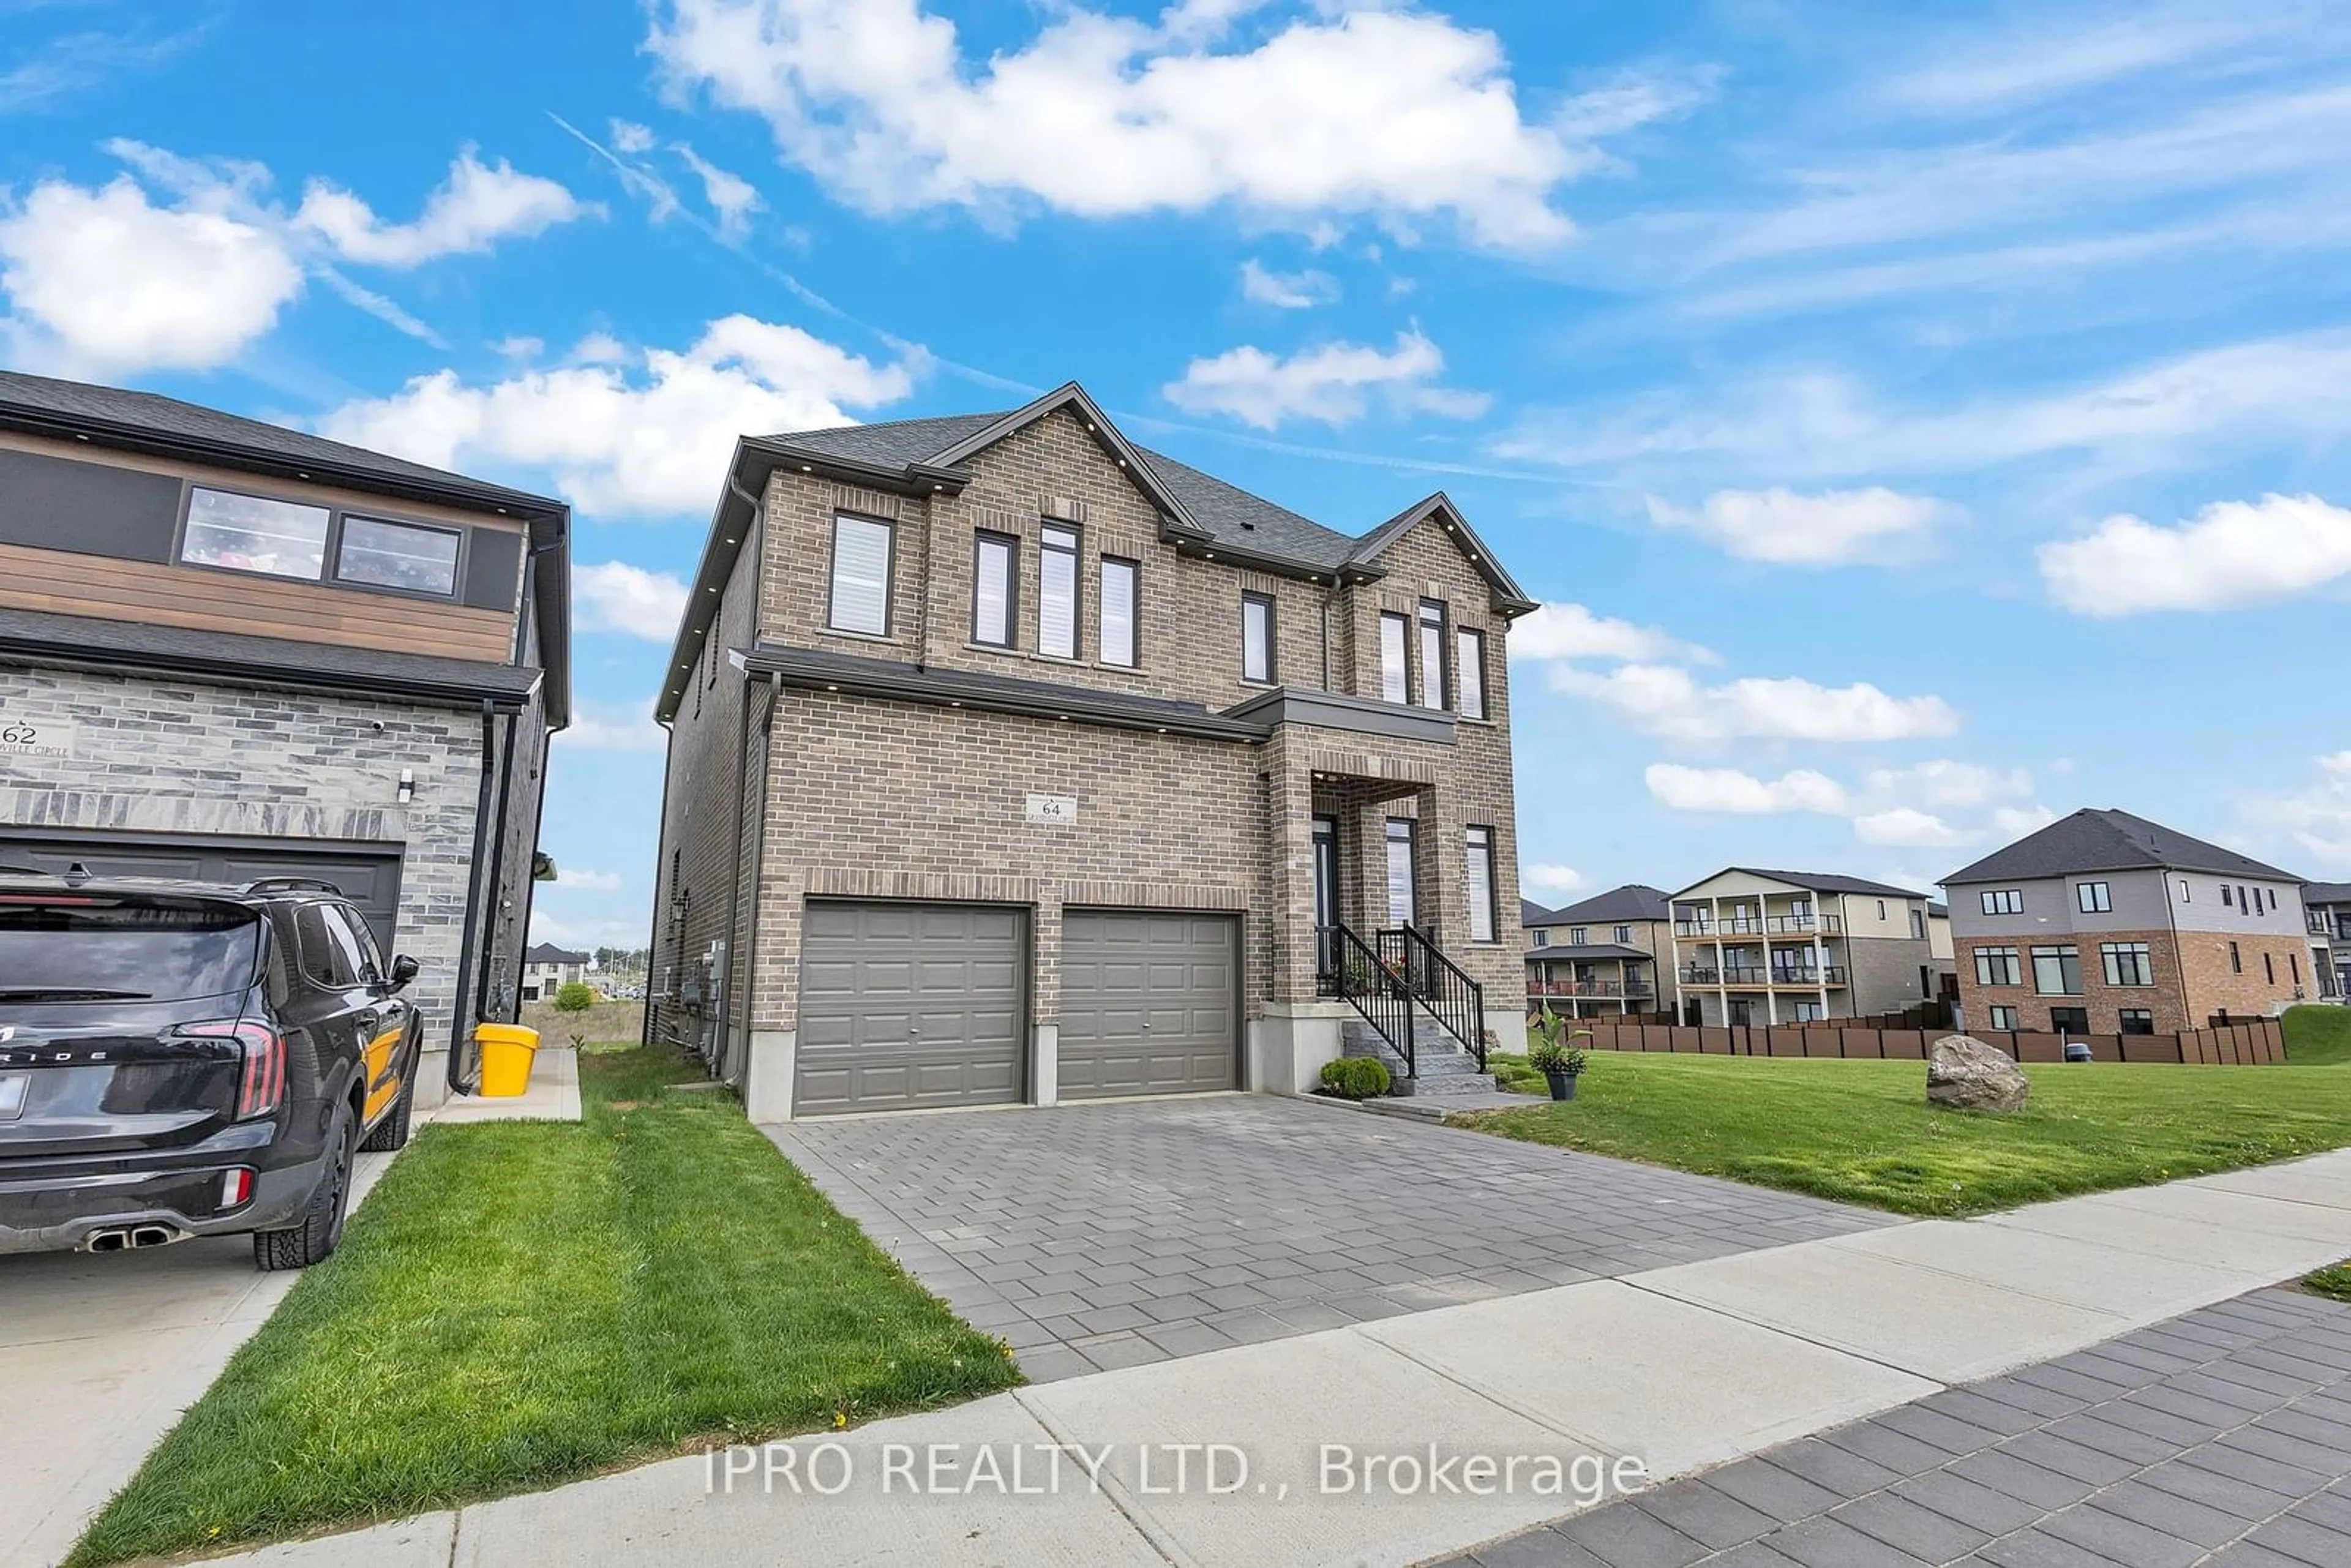 Frontside or backside of a home for 64 Grandville Circ, Brant Ontario N3L 0A9